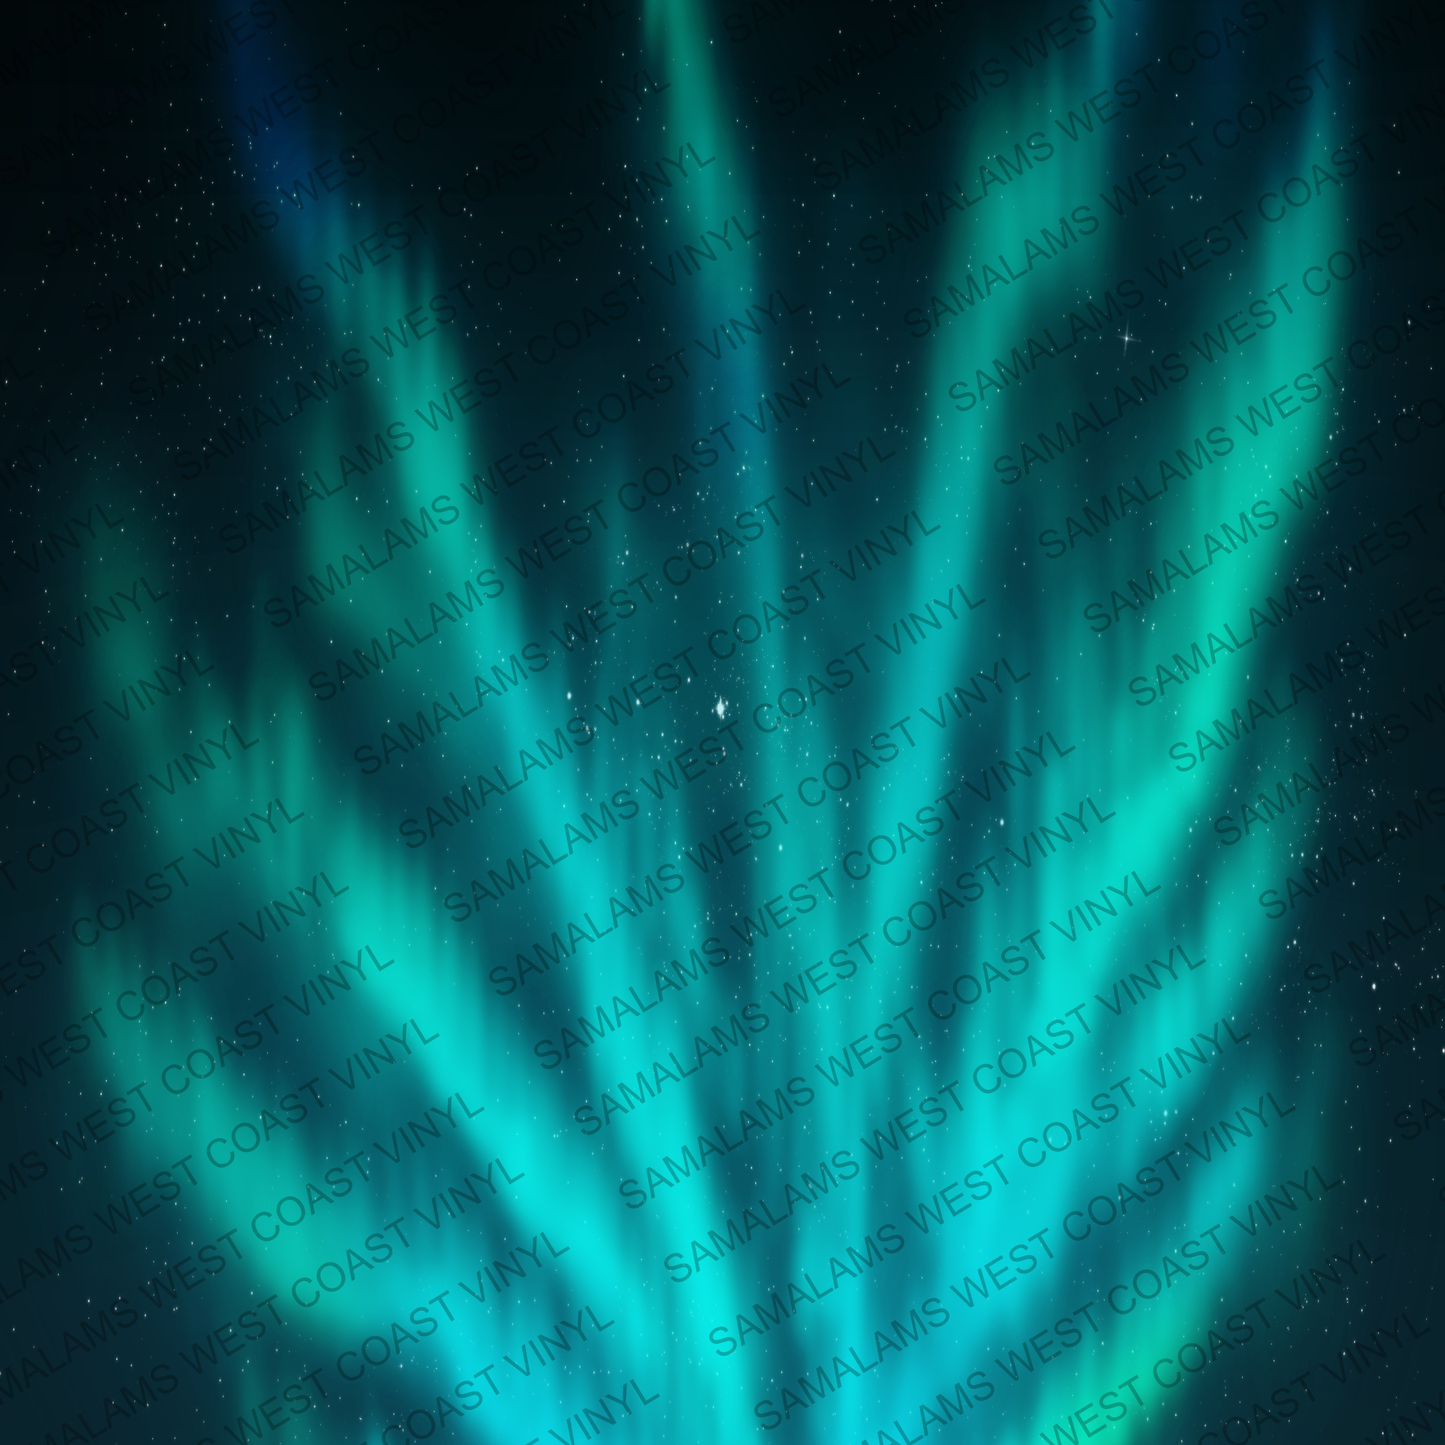 Northern Lights - Pack 1 (Not Seamless)